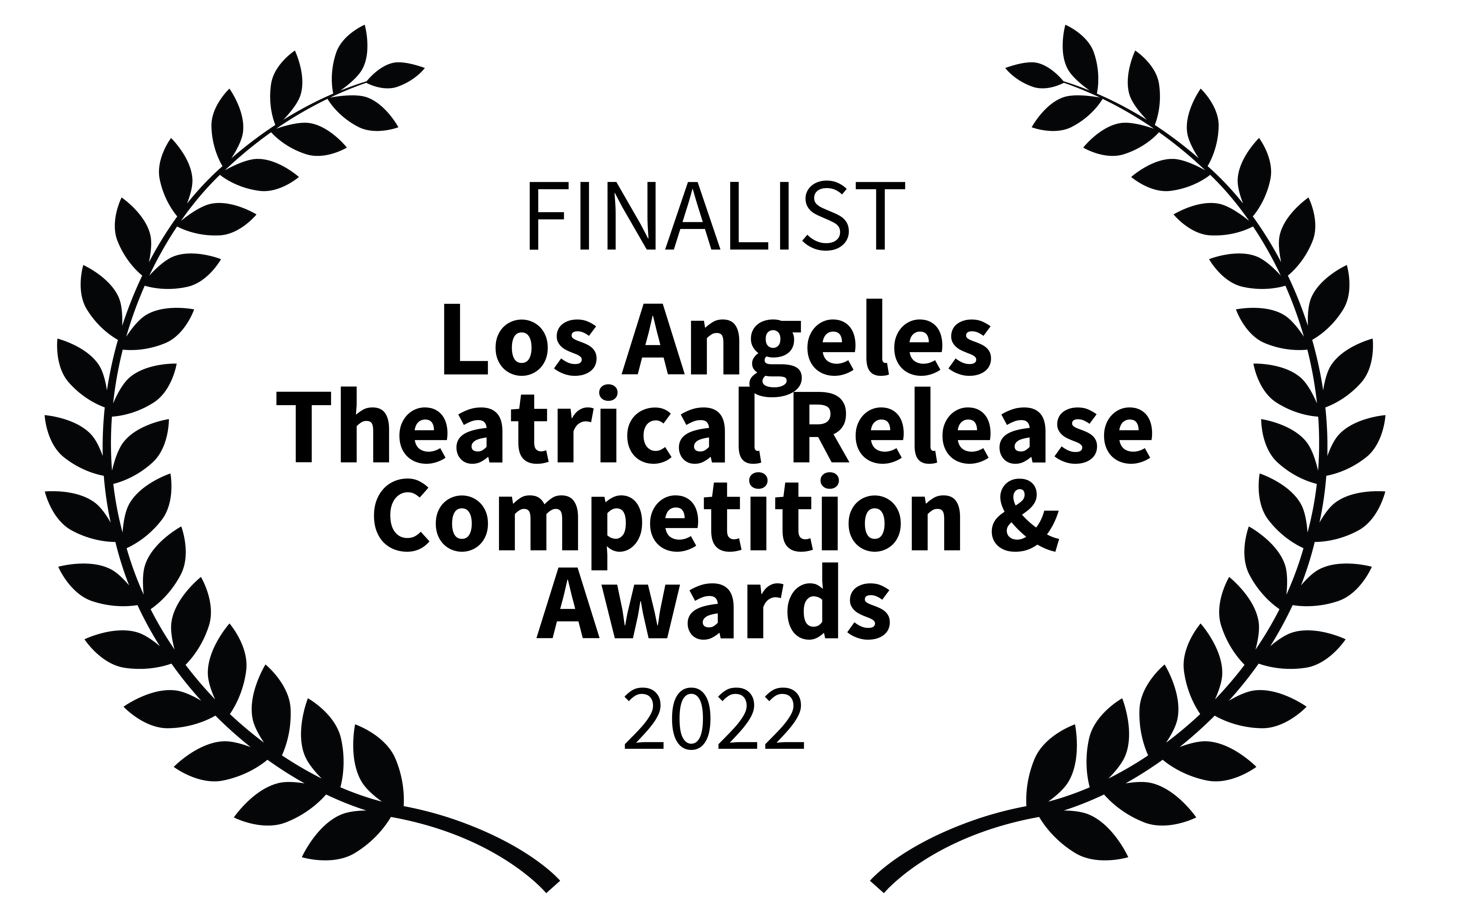 The Los Angeles Theatrical Release Competition and Awards